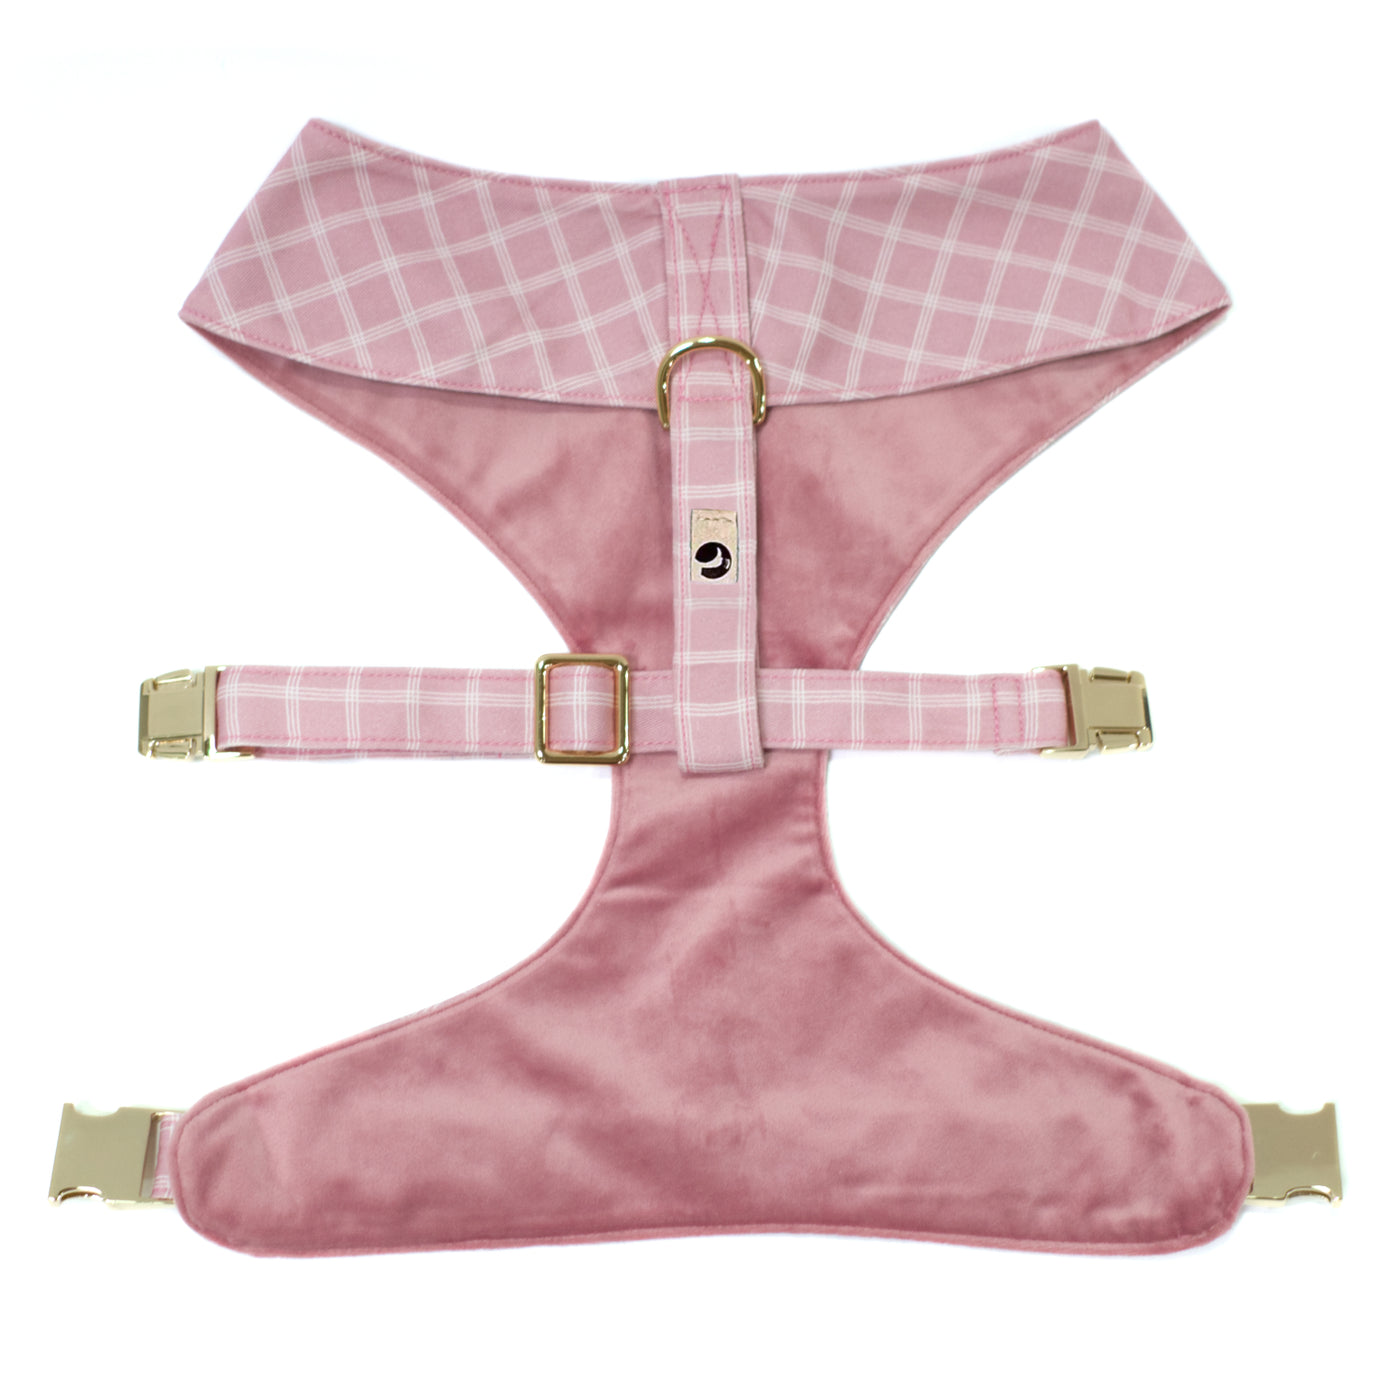 Light pink dog harness in triple windowpane plaid and velvet with gold hardware shown from back/top